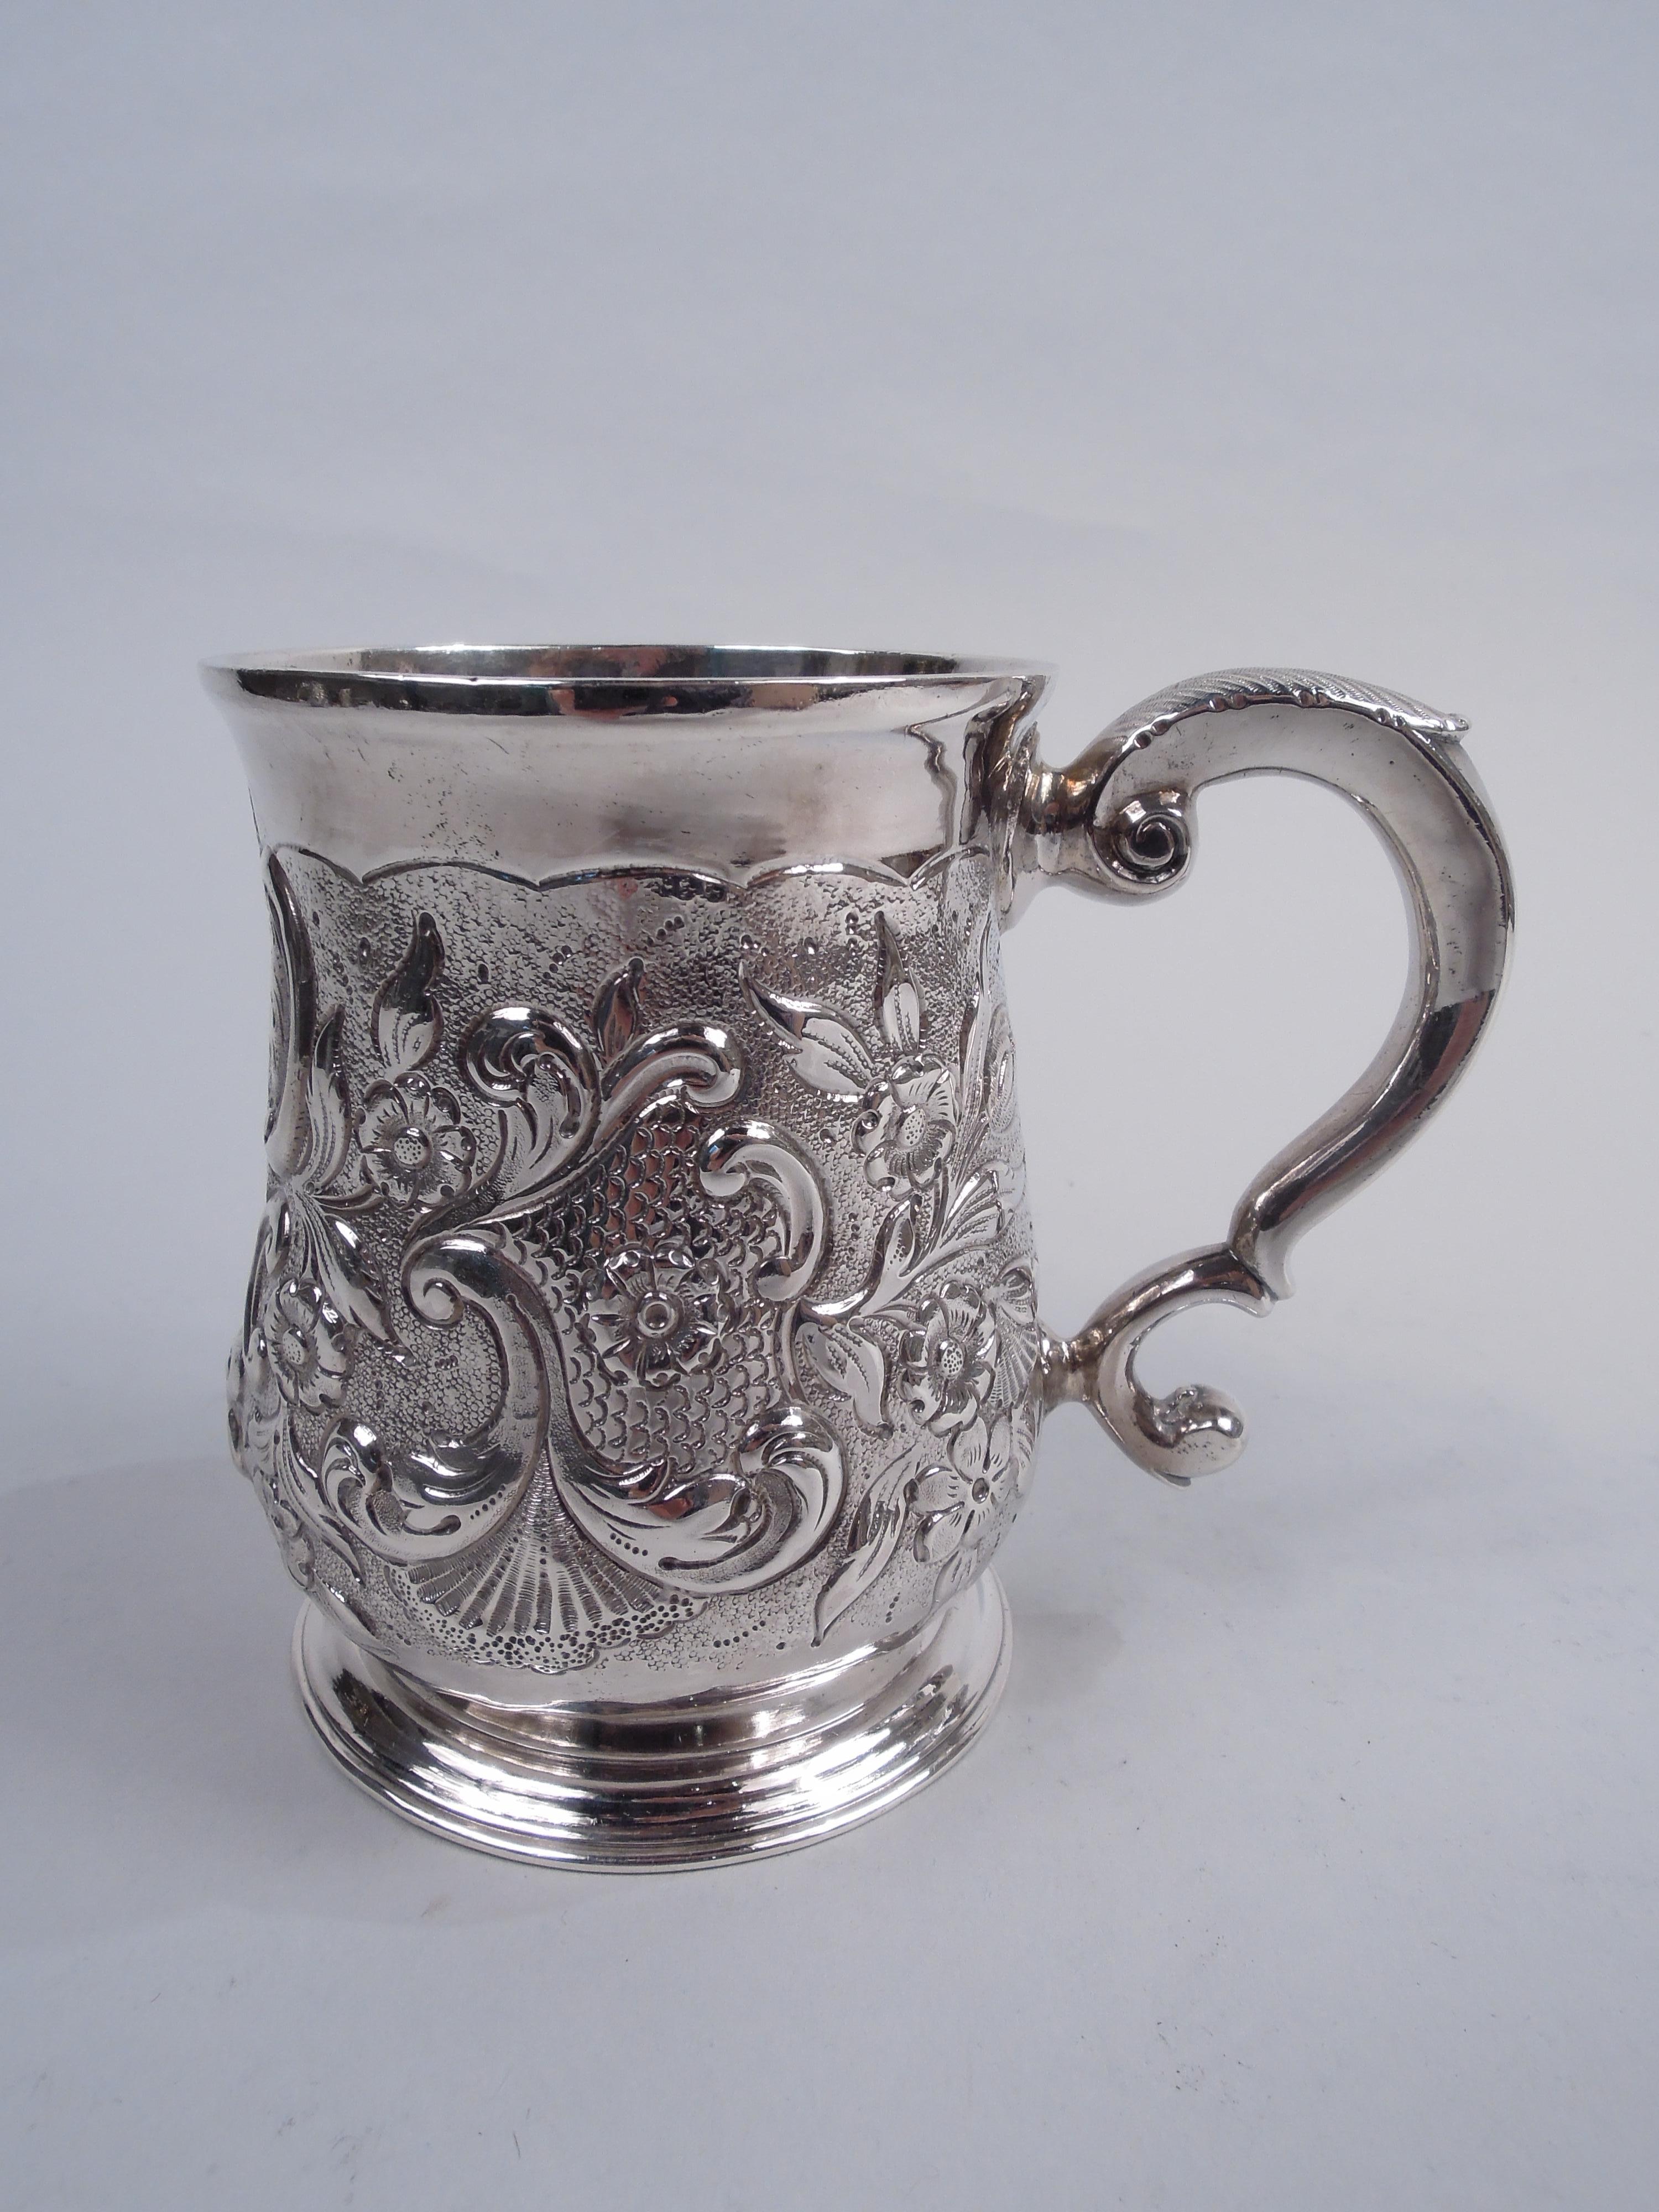 George II sterling silver mug. Made Thomas Tearle in London in 1735. Baluster bowl with leaf-capped double-scroll handle and spread raised foot. Later ornament in form of chased and engraved scrolls, flowers, and scallop shells on stippled ground.